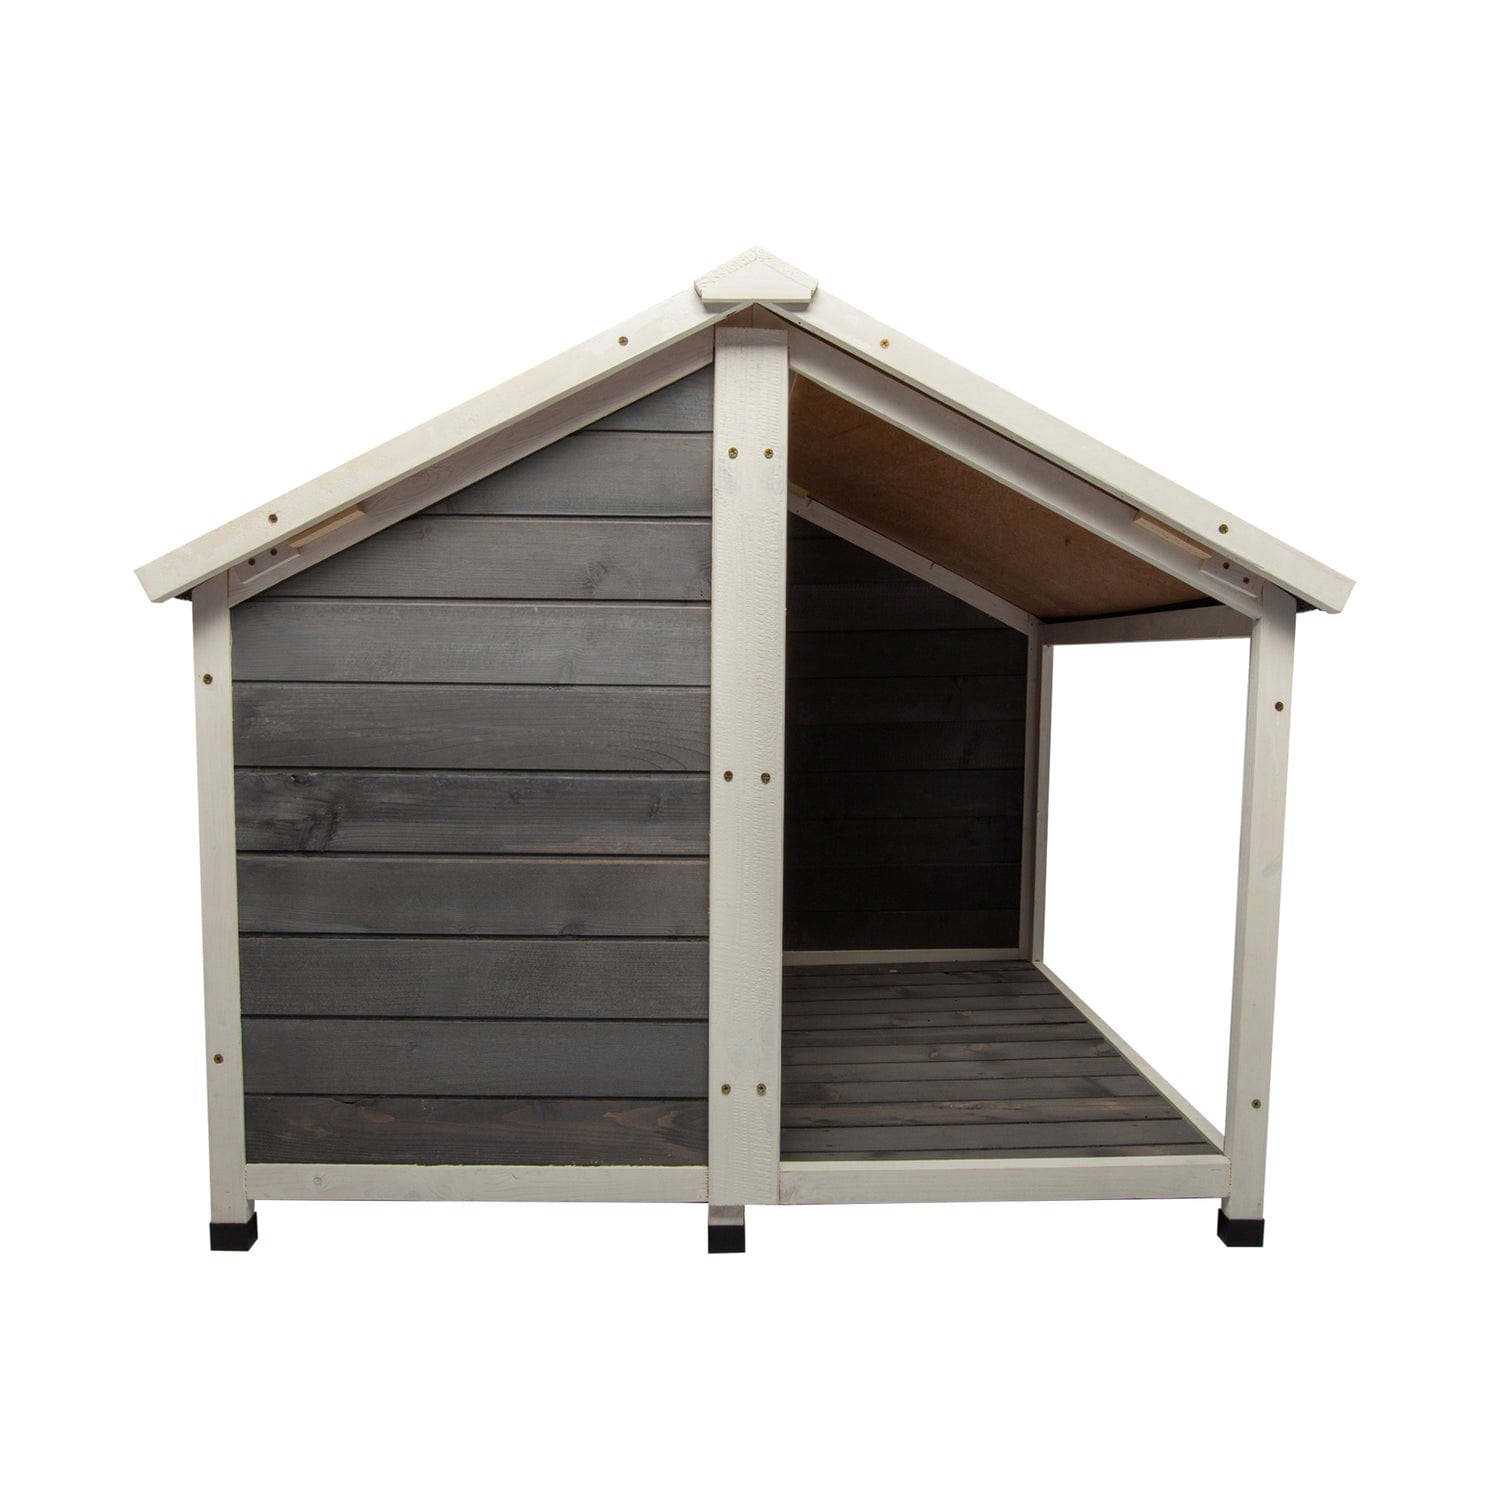 Wooden Dog Houses, Weatherproof Indoor and Outdoor Dog Kennel with Raised Feet for Small Dogs Medium Dogs and Large Dogs, Light Gray